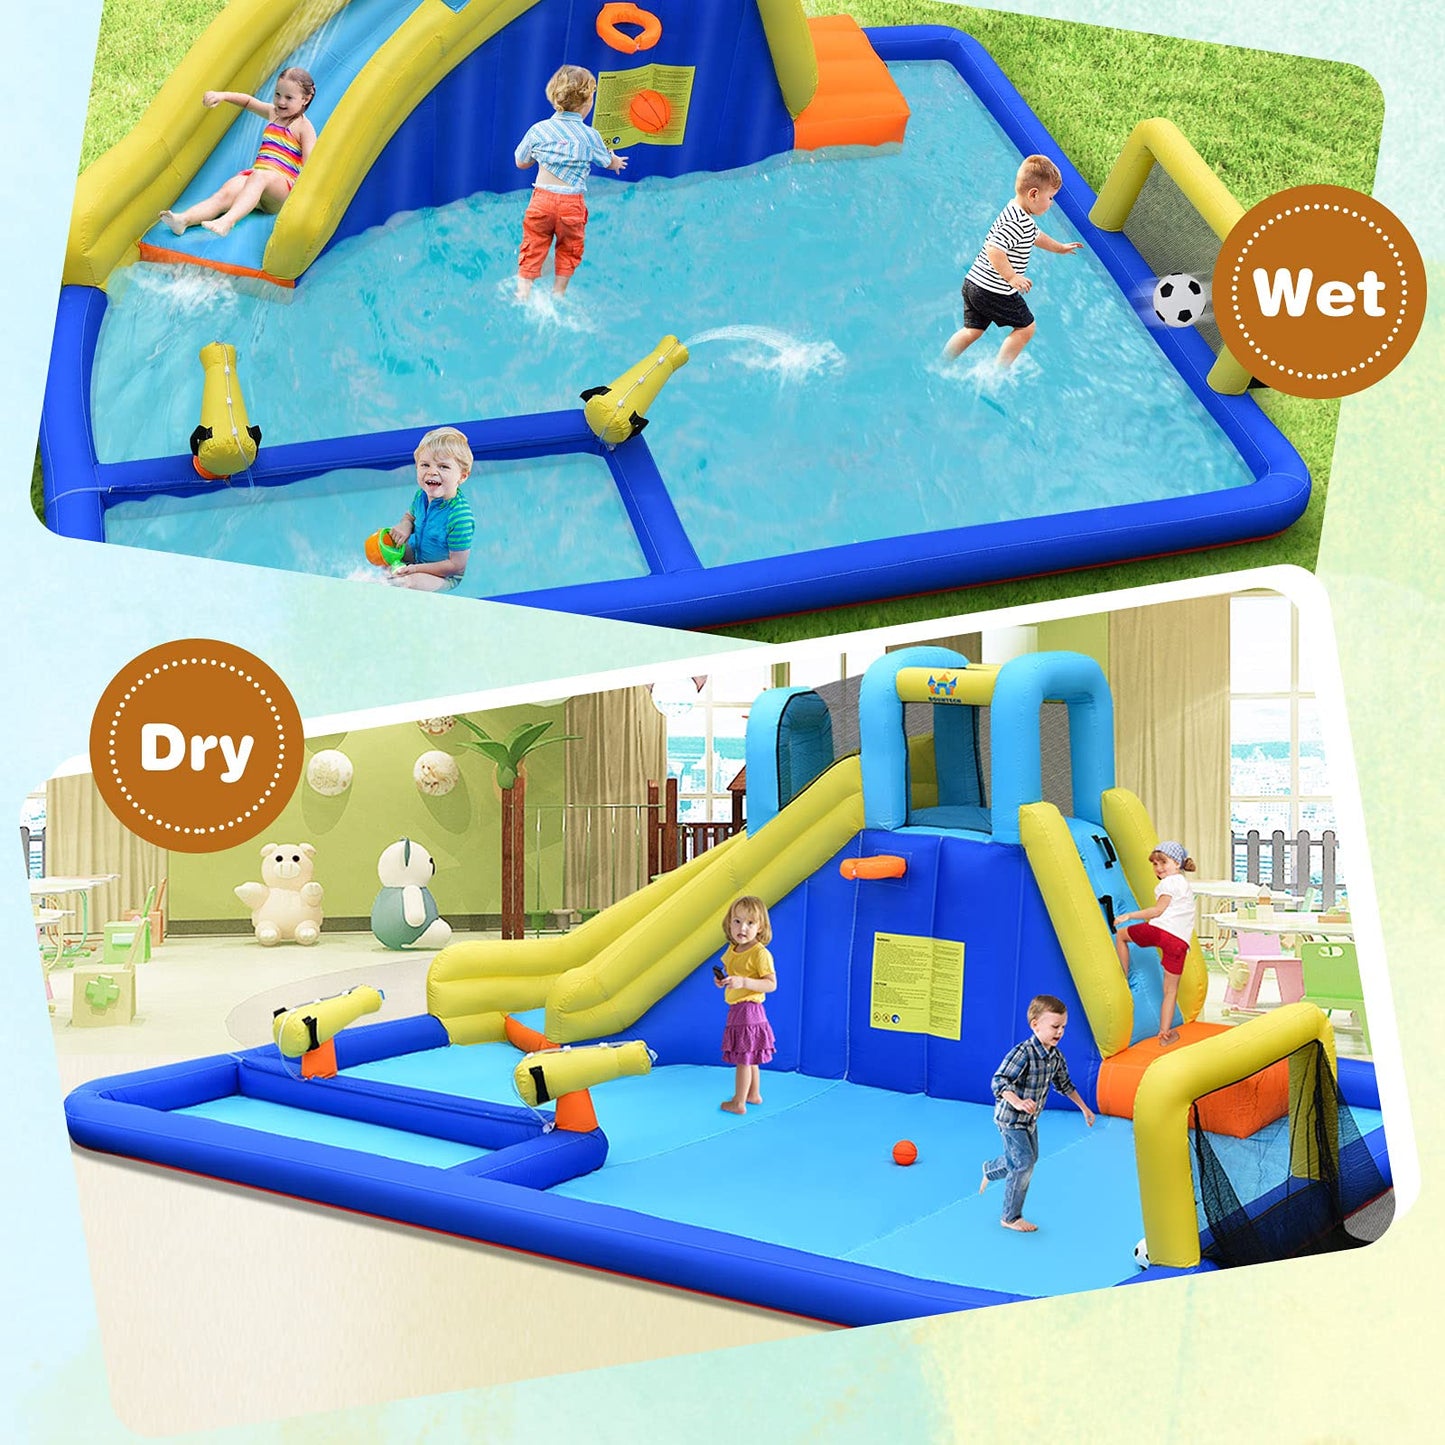 BOUNTECH Inflatable Water Slides for Kids, 6-in-1 Giant Water Park for Outdoor Fun w/Water Soccer Splash Pool, Blow up Waterslide Inflatables for Kids and Adults Backyard Party Gifts Without Air Blower